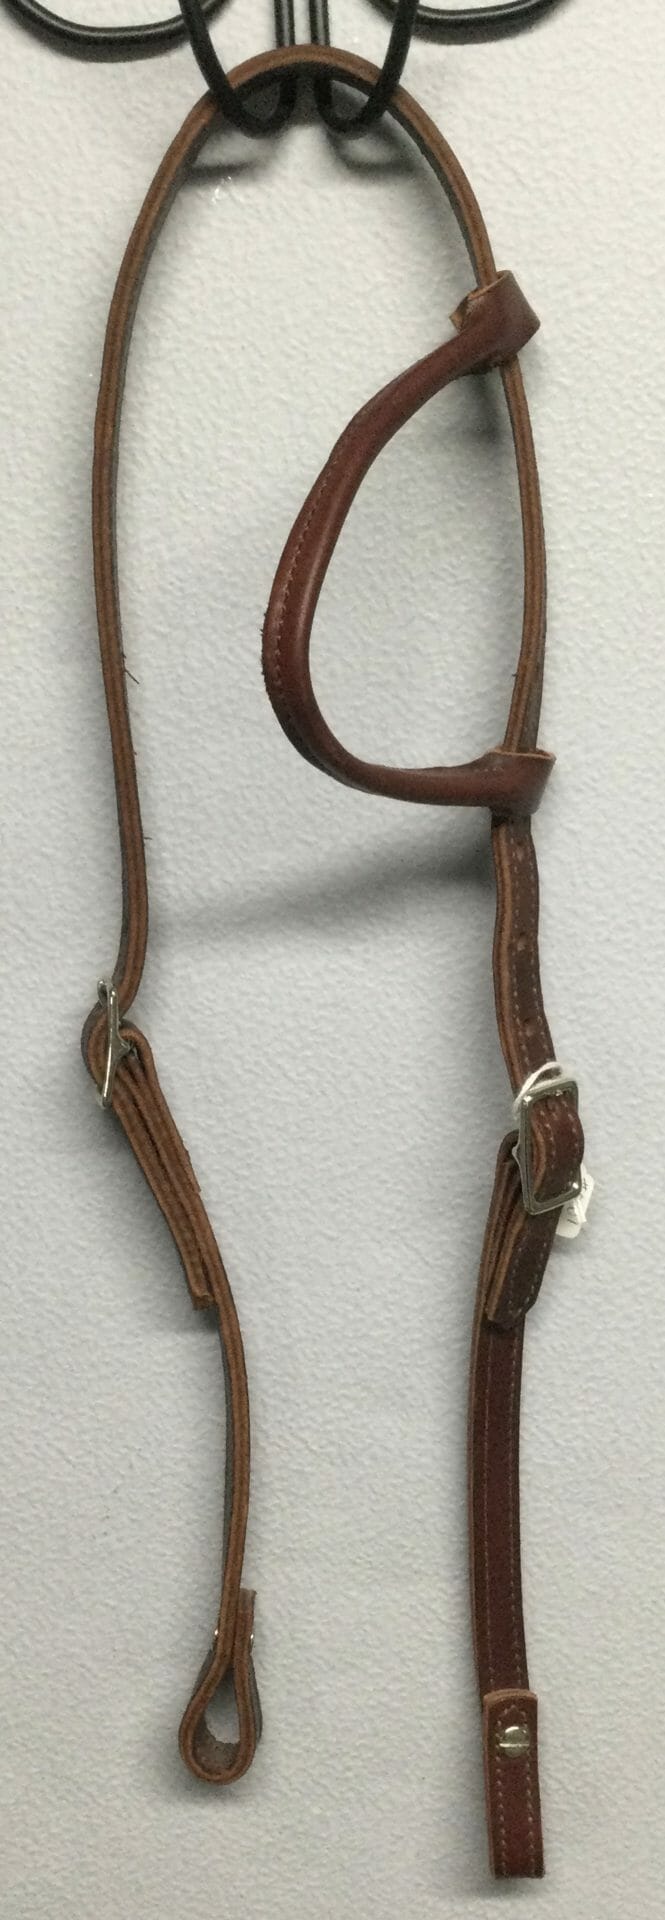 0001 Western Headstall, Cob/Large Pony - The Trainer's Loft